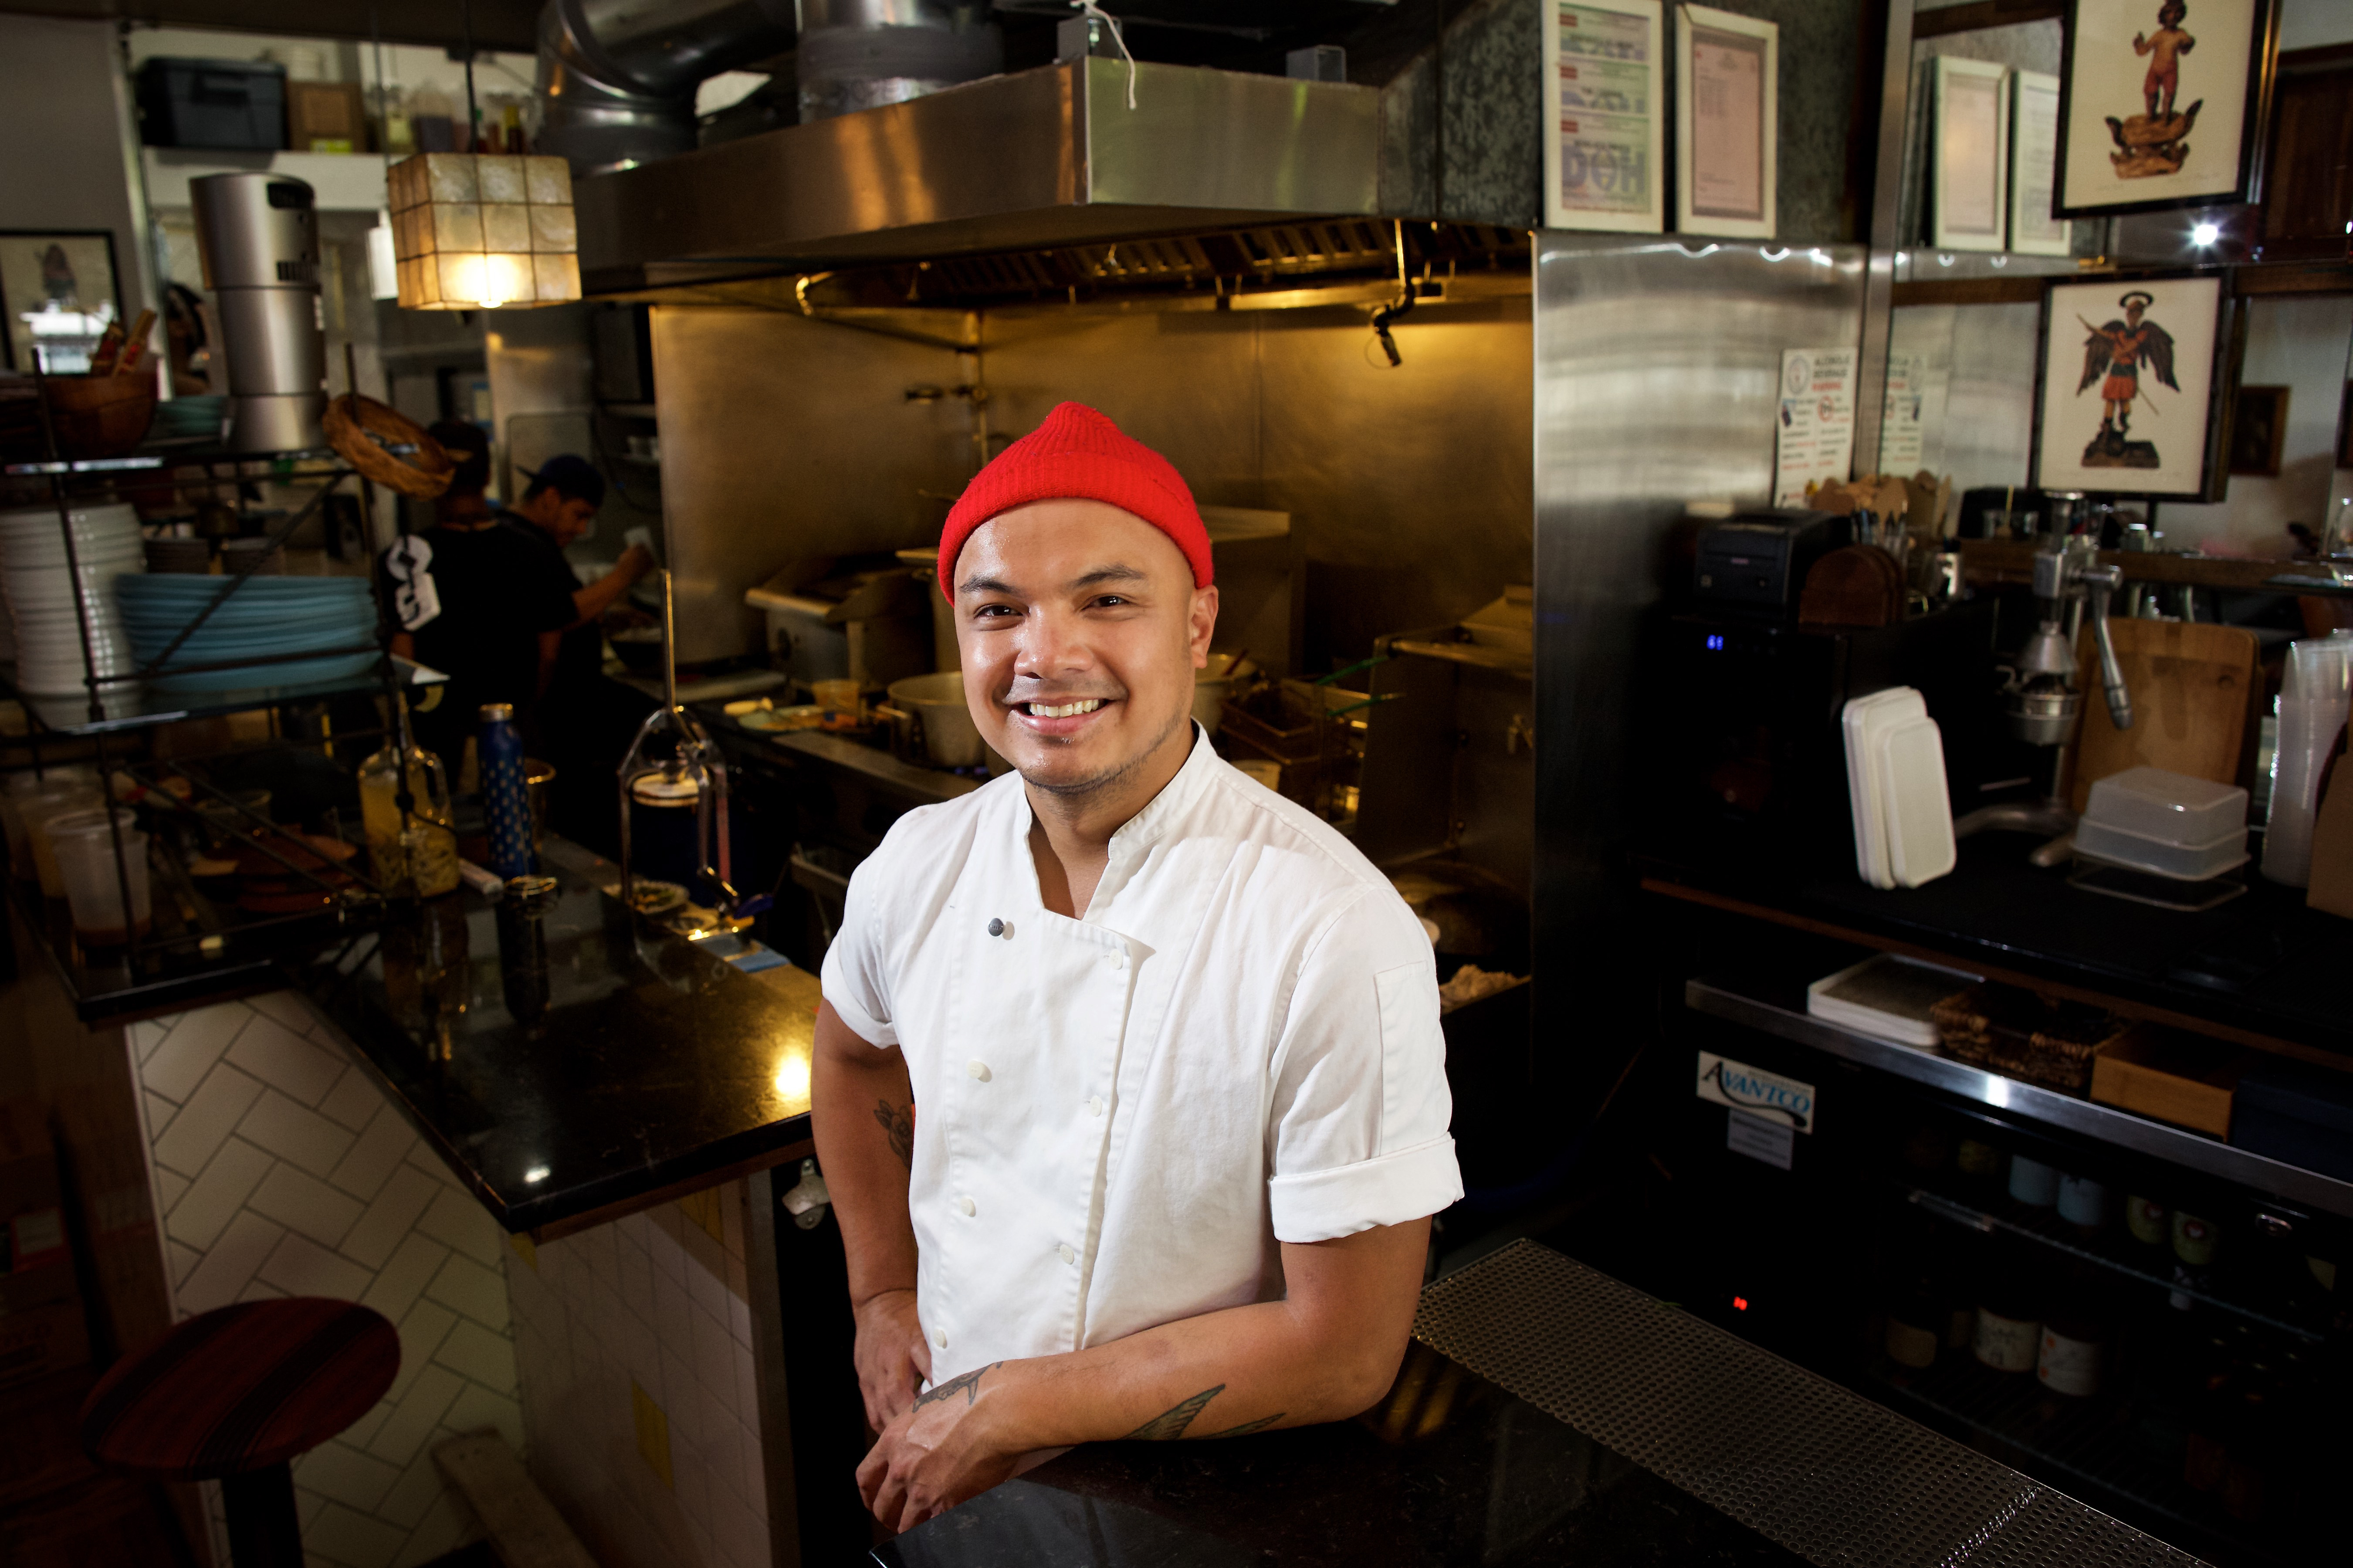 A picture of Tom Cunanan of Bad Saint standing in his restaurant with a red beanie on